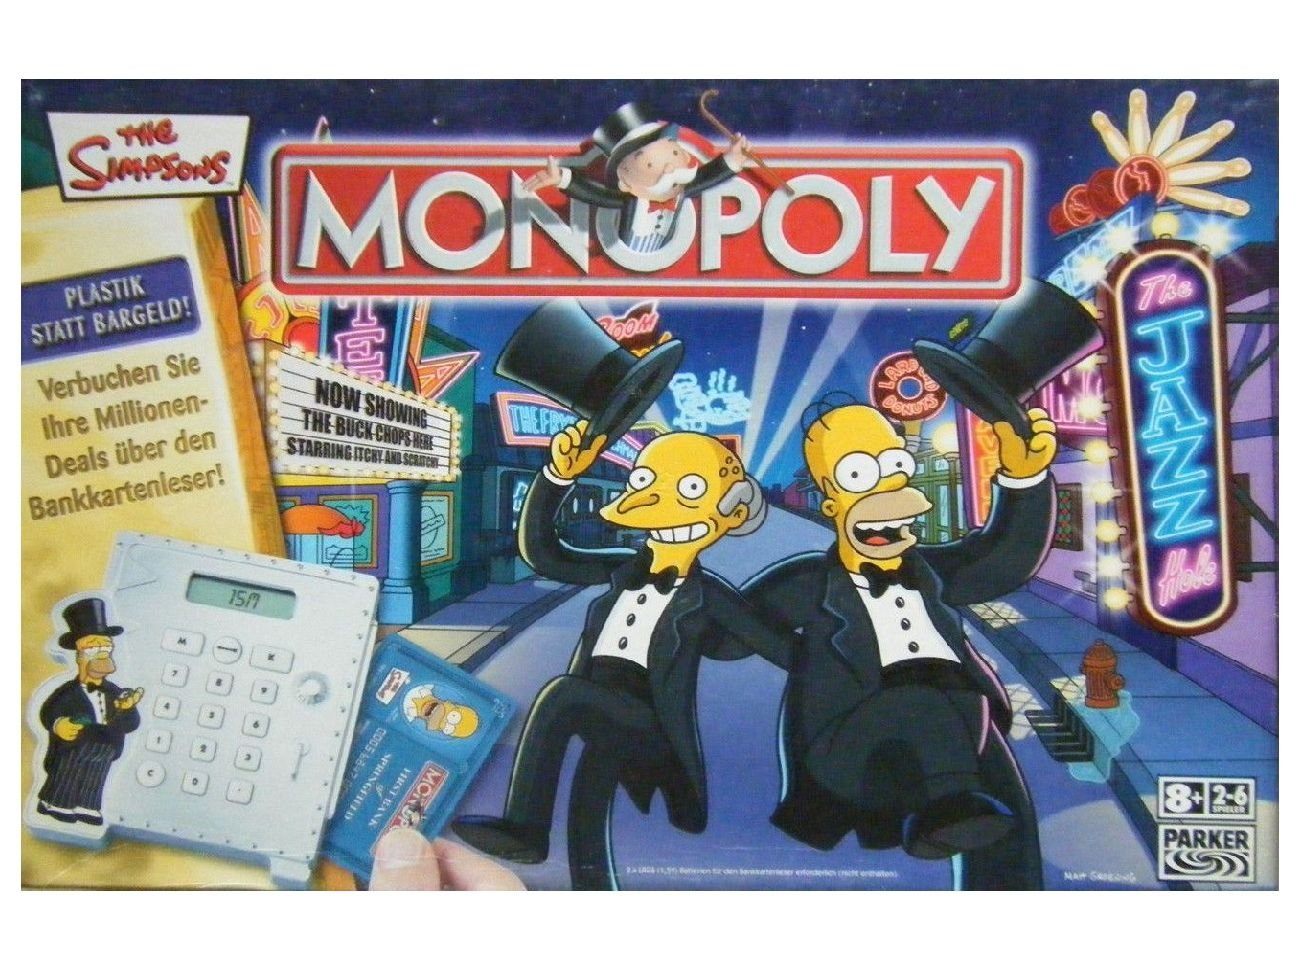 All details for the board game Monopoly: The Simpsons and similar games